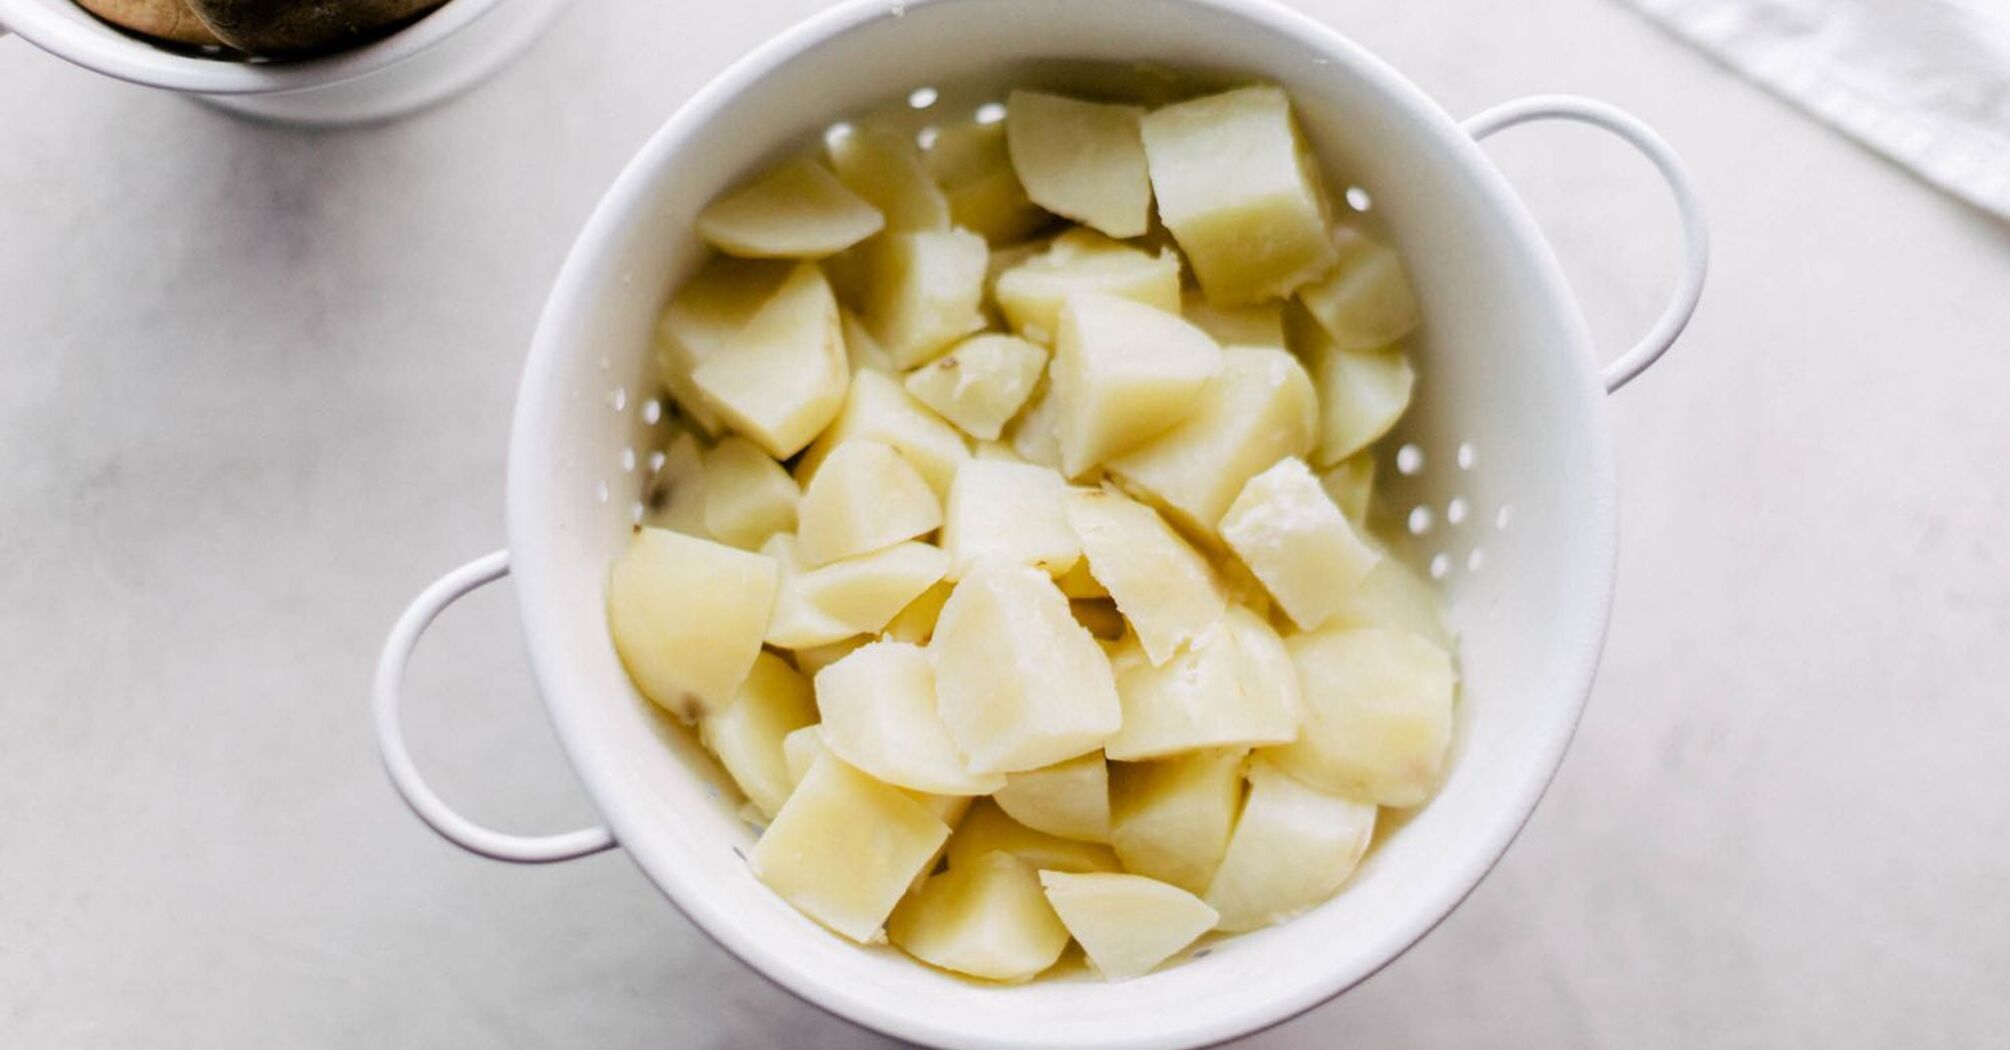 How to peel an entire pot of boiled potatoes in a few minutes